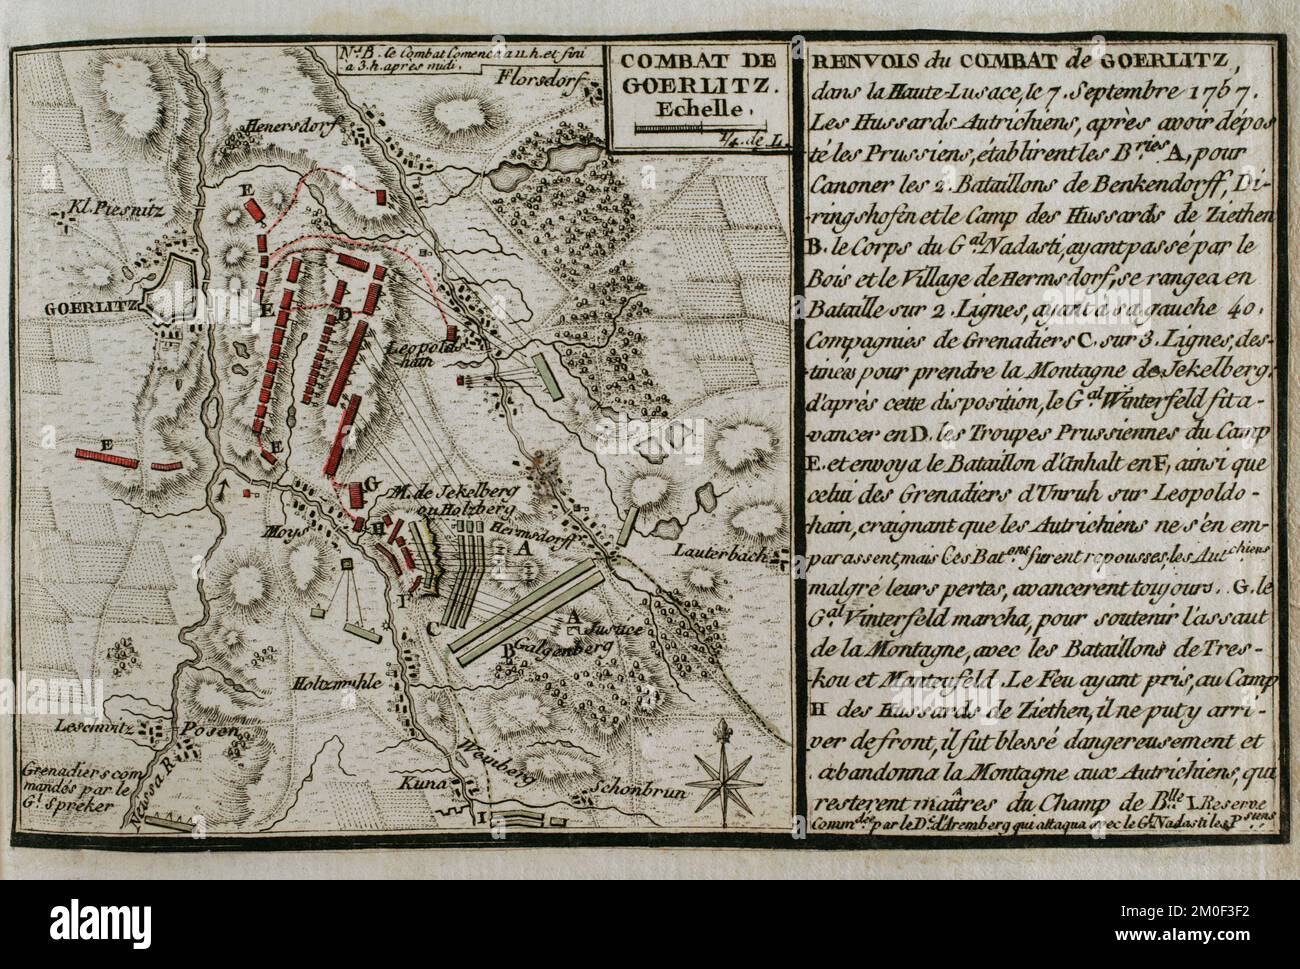 Seven Years War (1756-1763). Map of the Combat of Görlitz (September 7, 1757). Episode that took place during the Battle of Moys, as part of the Third Silesian War. A Prussian army, commanded by Hans Karl Von Winterfeldt, was defeated by Austrian forces led by Marshal Daun. The entire Prussian corps surrendered to the Austrians. Published in 1765 by the cartographer Jean de Beaurain (1696-1771) as an illustration of his Great Map of Germany, with the events that took place during the Seven Years War. Etching and engraving. French edition, 1765. Military Historical Library of Barcelona (Bibliot Stock Photo